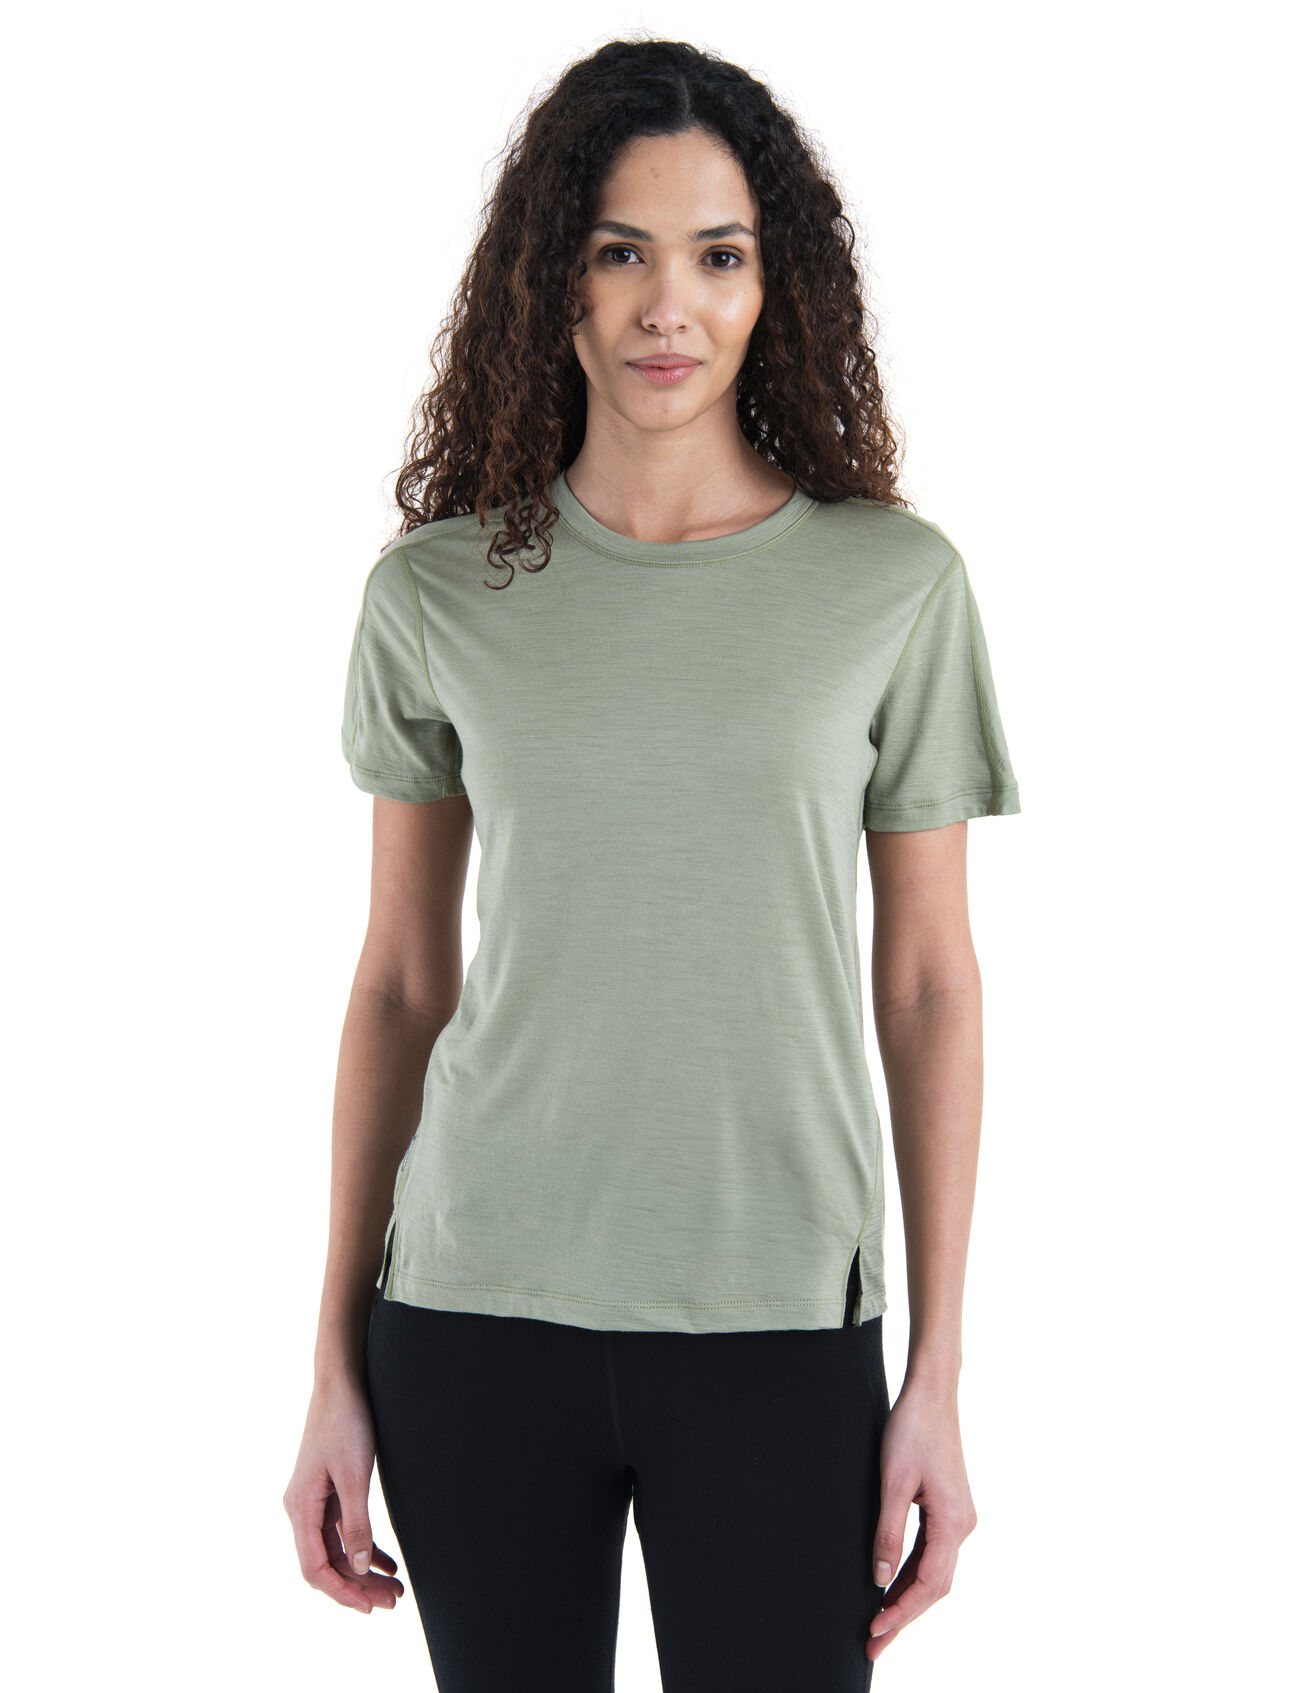 Womens 150 MerinoFine™ Ace T-Shirt A lightweight, go-anywhere performance tee designed for high-intensity movement, the MerinoFine™ Ace Short Sleeve Tee naturally regulates body temperature and resists odours thanks to its 100% ultrafine merino wool fabric.